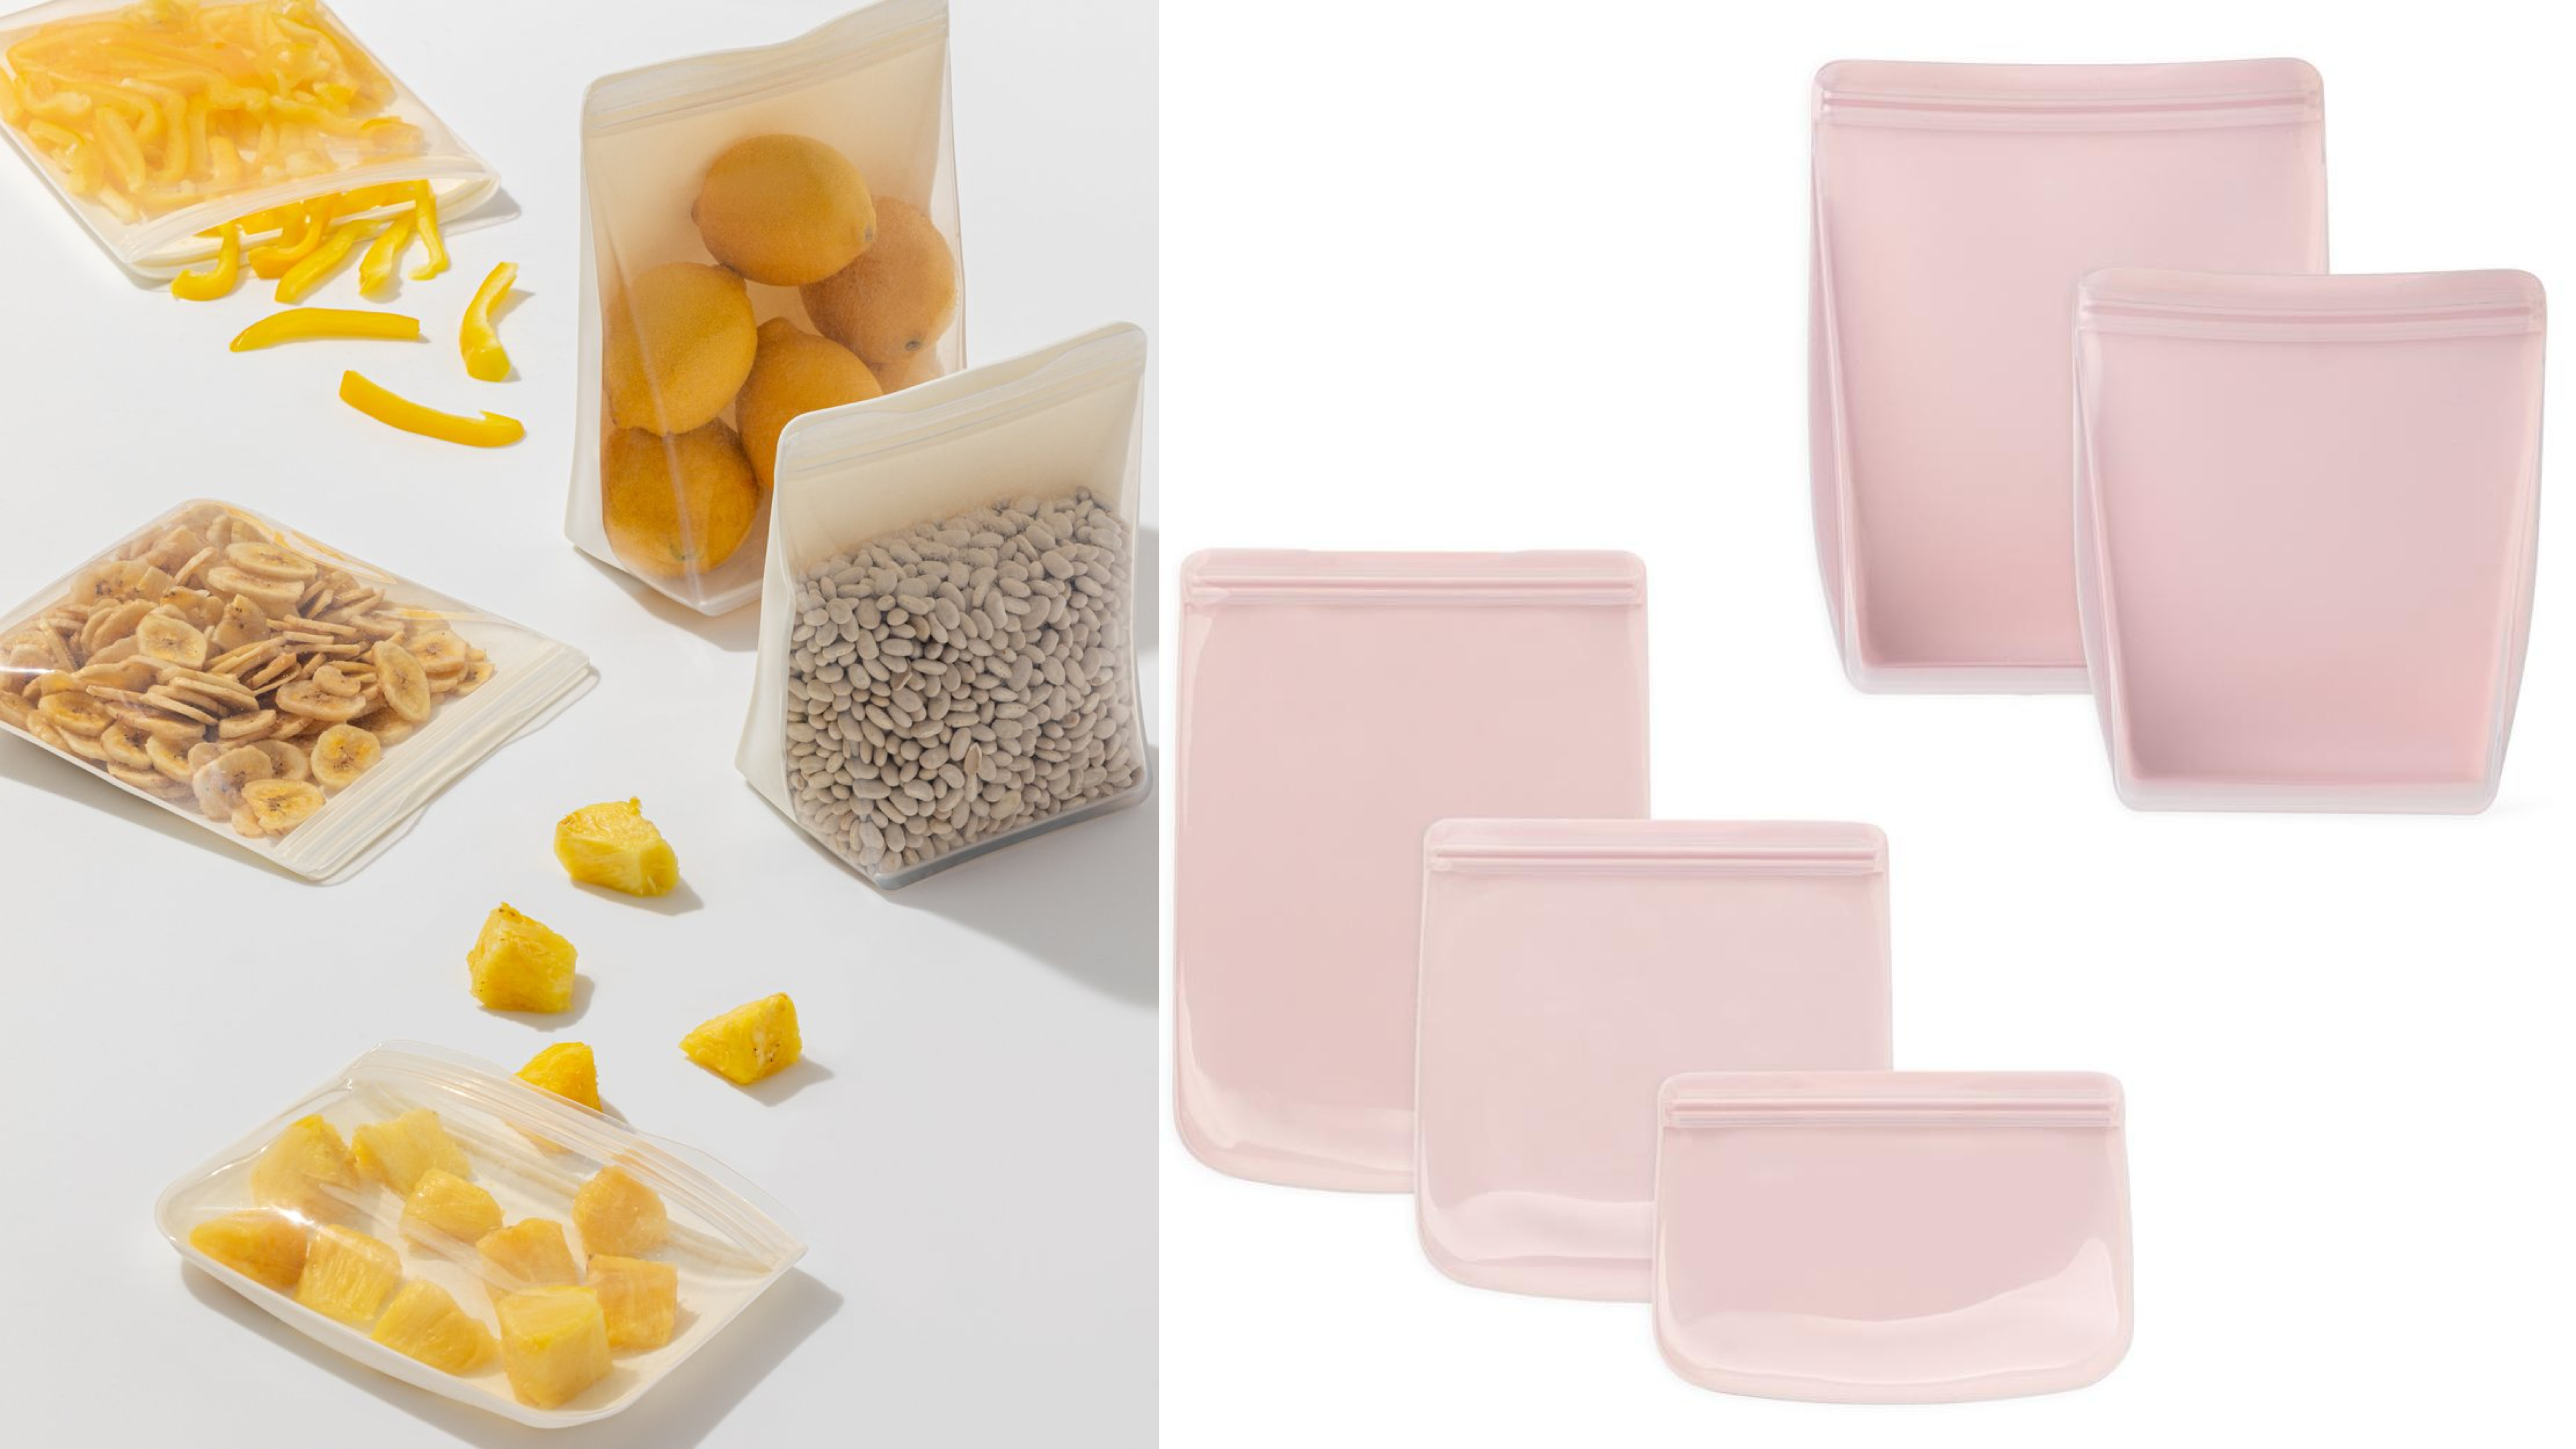 silicone reusable bags to store food and other knick knacks